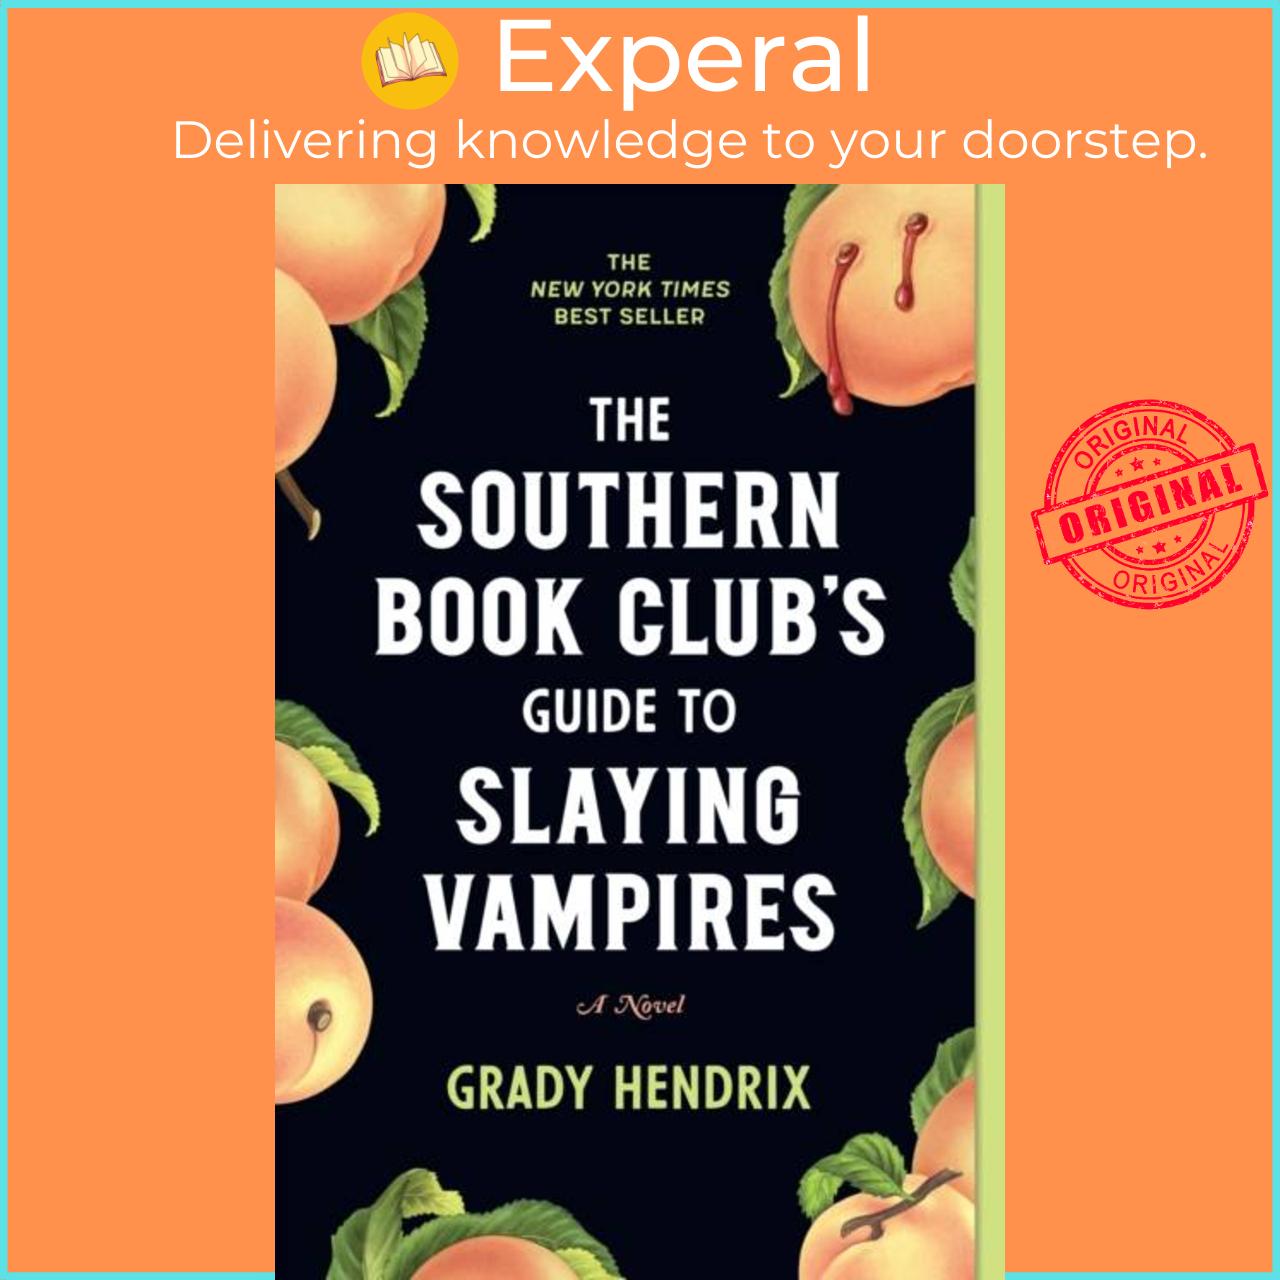 Sách - The Southern Book Club's Guide to Slaying Vampires - A Novel by Grady Hendrix (UK edition, paperback)